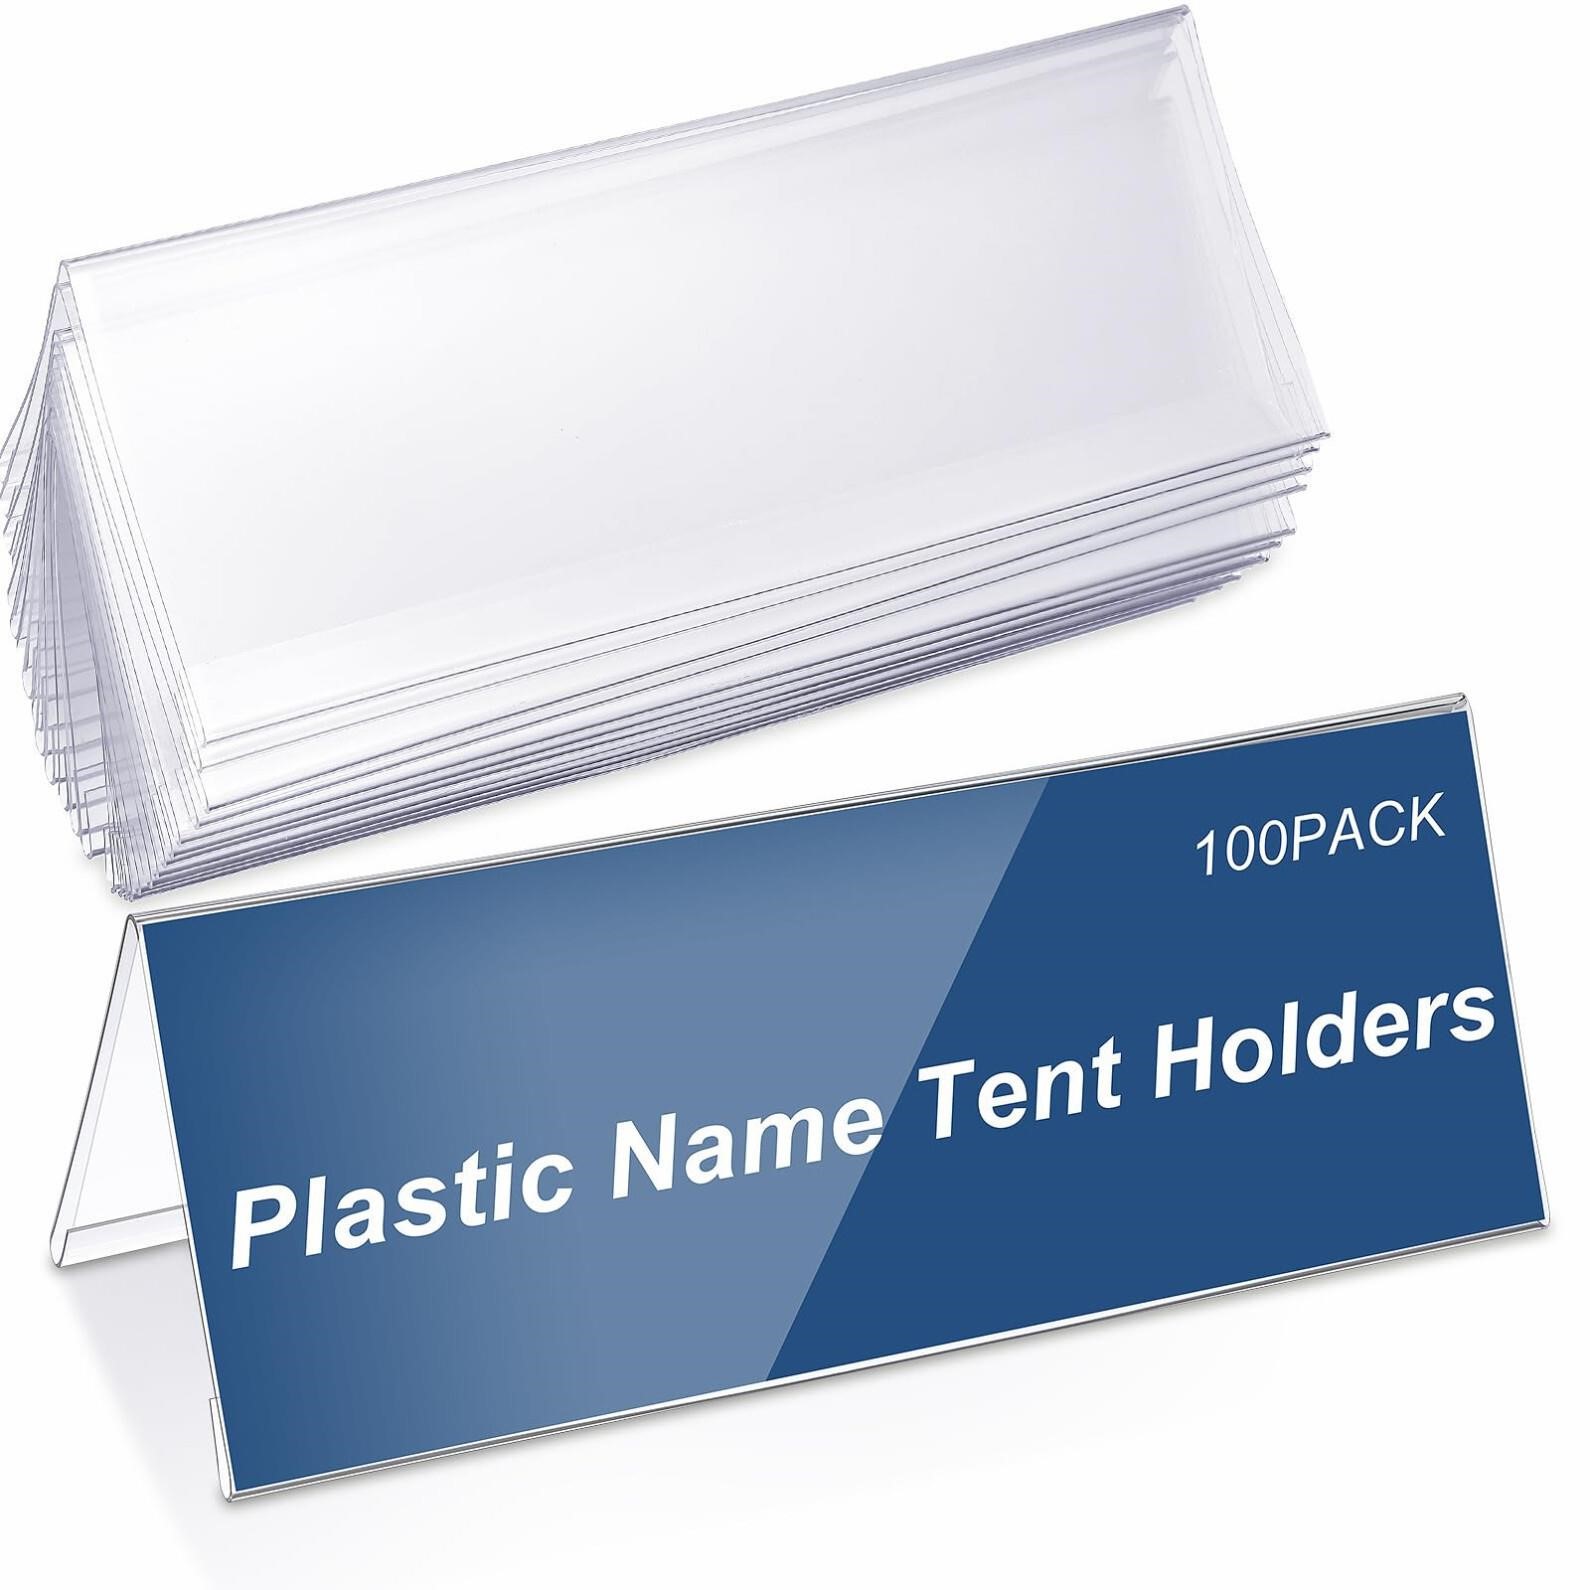 Clear Plastic Name Tent Holders 11" x 4.25" Acryli